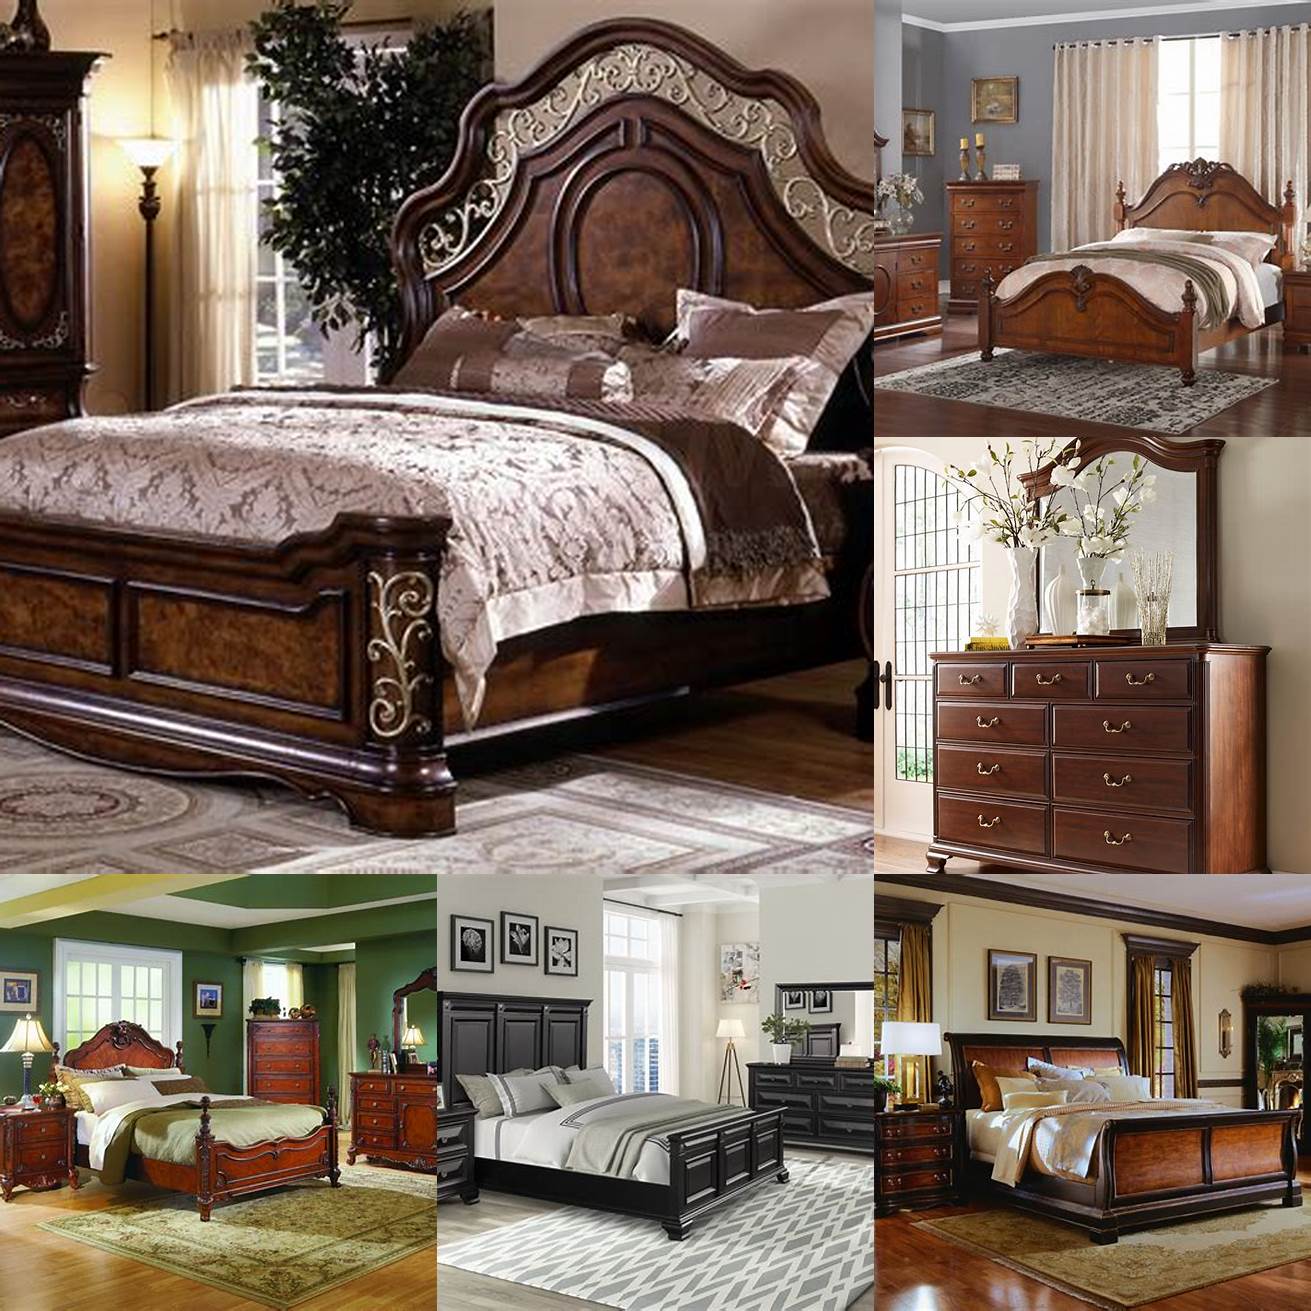 A traditional bedroom dresser set with classic designs made from durable materials such as wood or metal